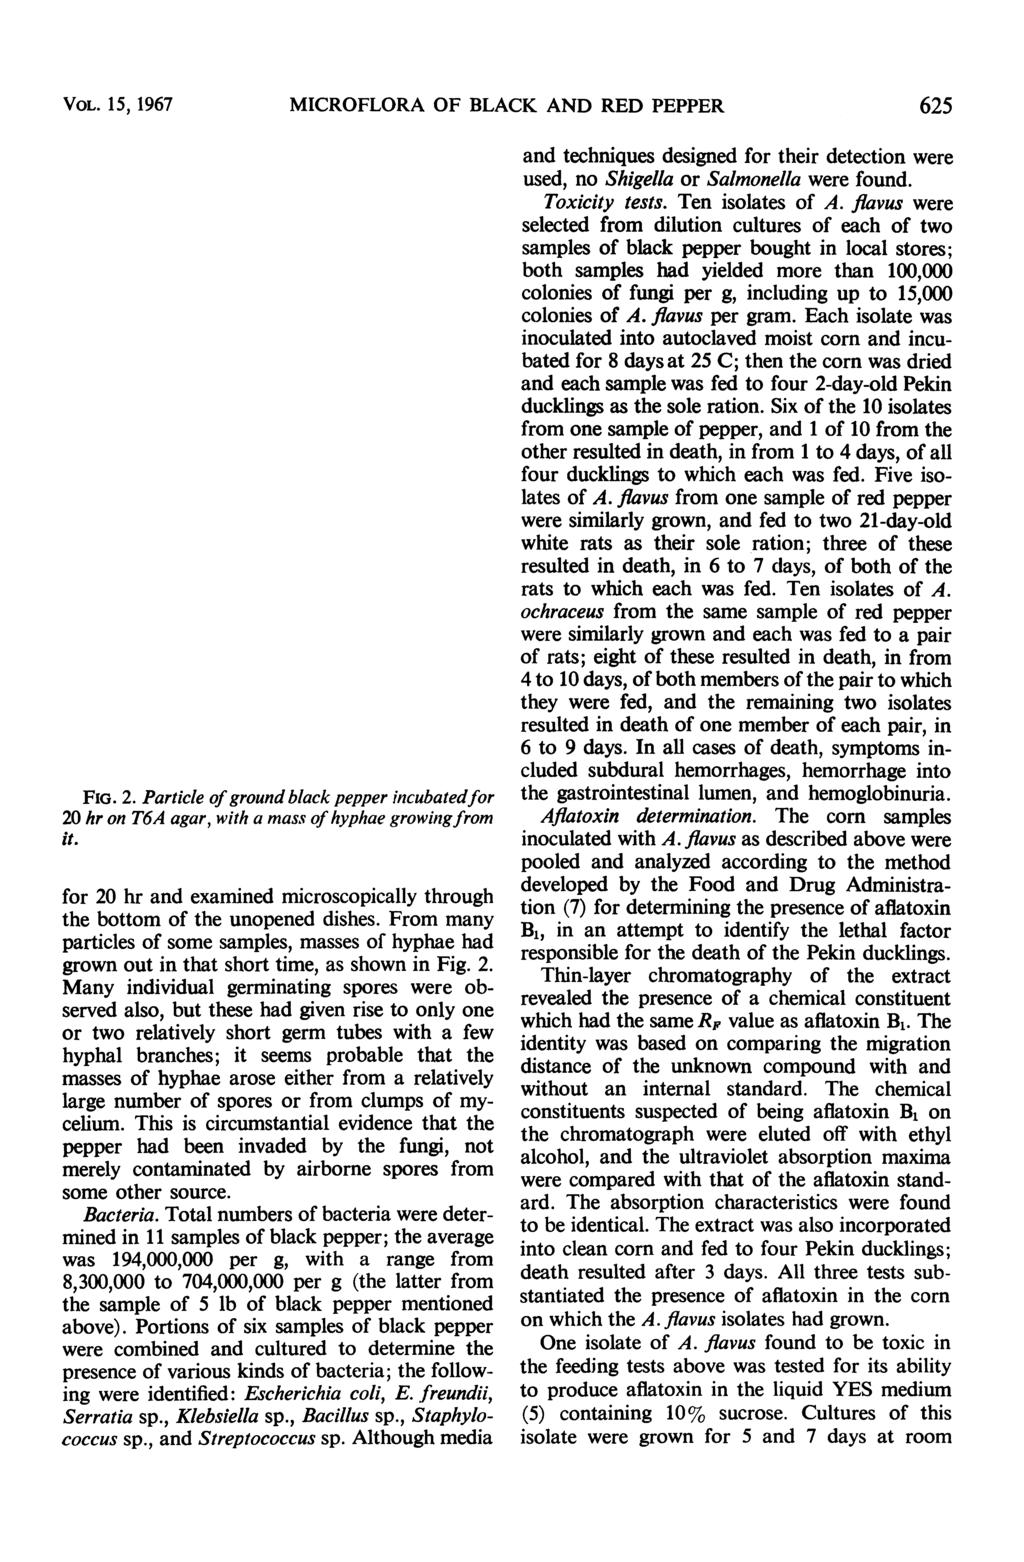 VOL. 15, 1967 MICROFLORA OF BLACK AND RED PEPPER 625-41 W K.V FIG. 2. Particle of ground black pepper incubatedfor 20 hr on T6A agar, with a mass of hyphae growingfrom it.